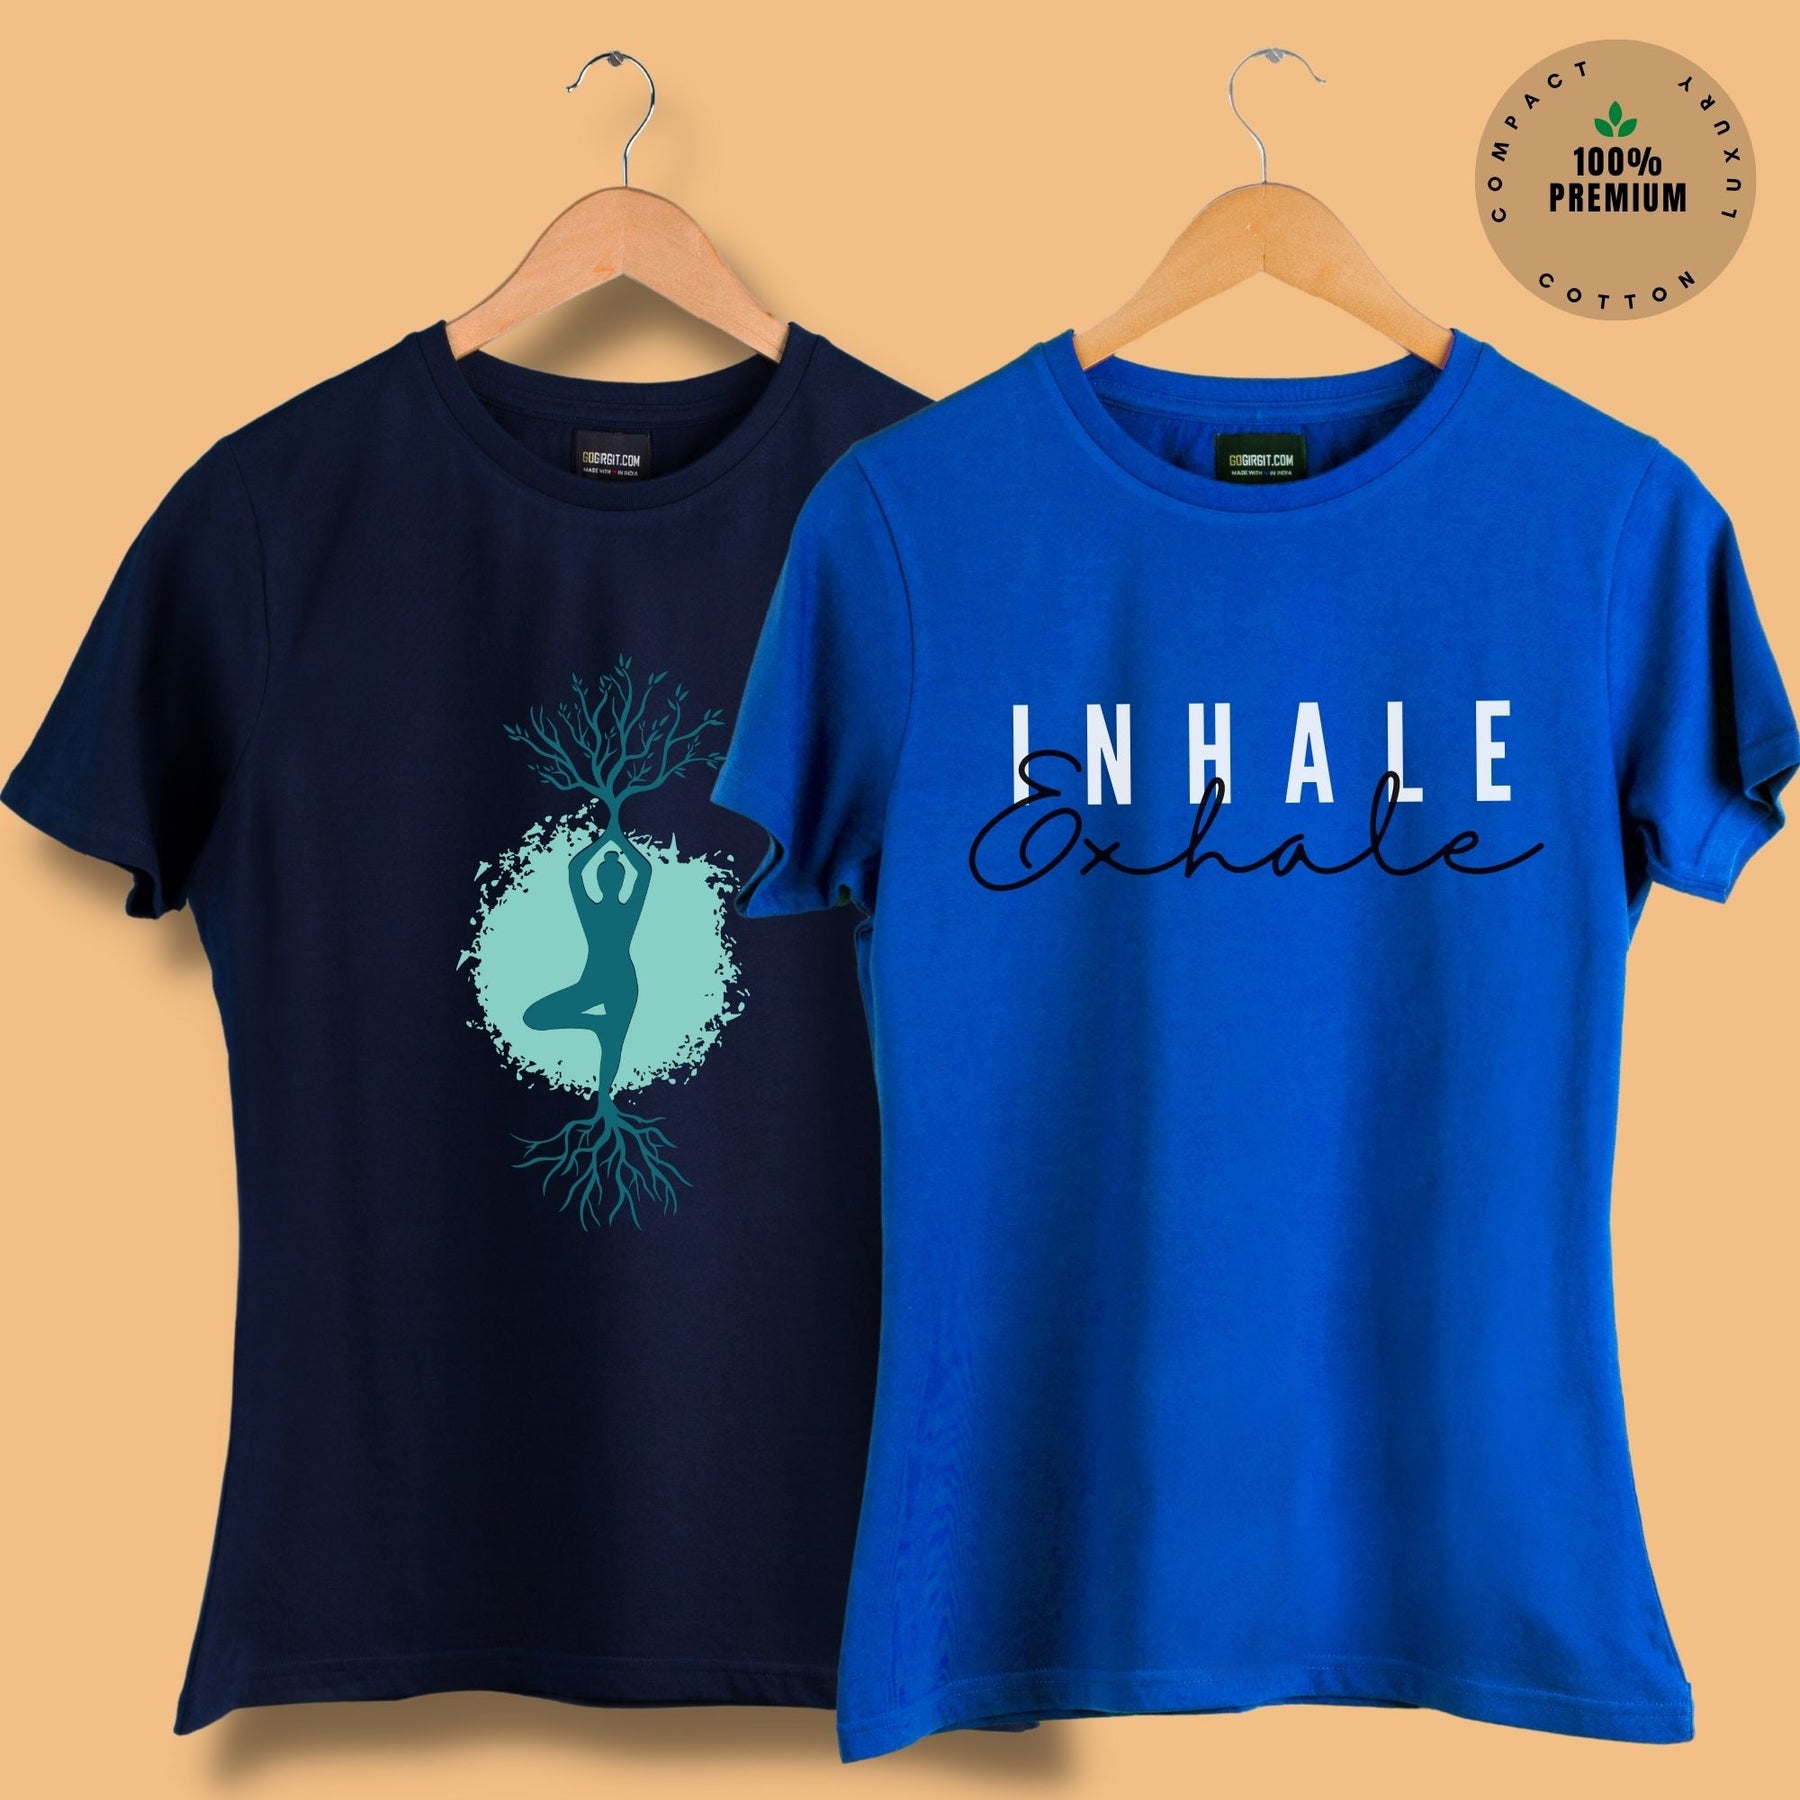 pack-of-2-women-s-printed-t-shirts-in-tree-pose-navy-blue-inhale-exhale-royal-blue-design-tshirt